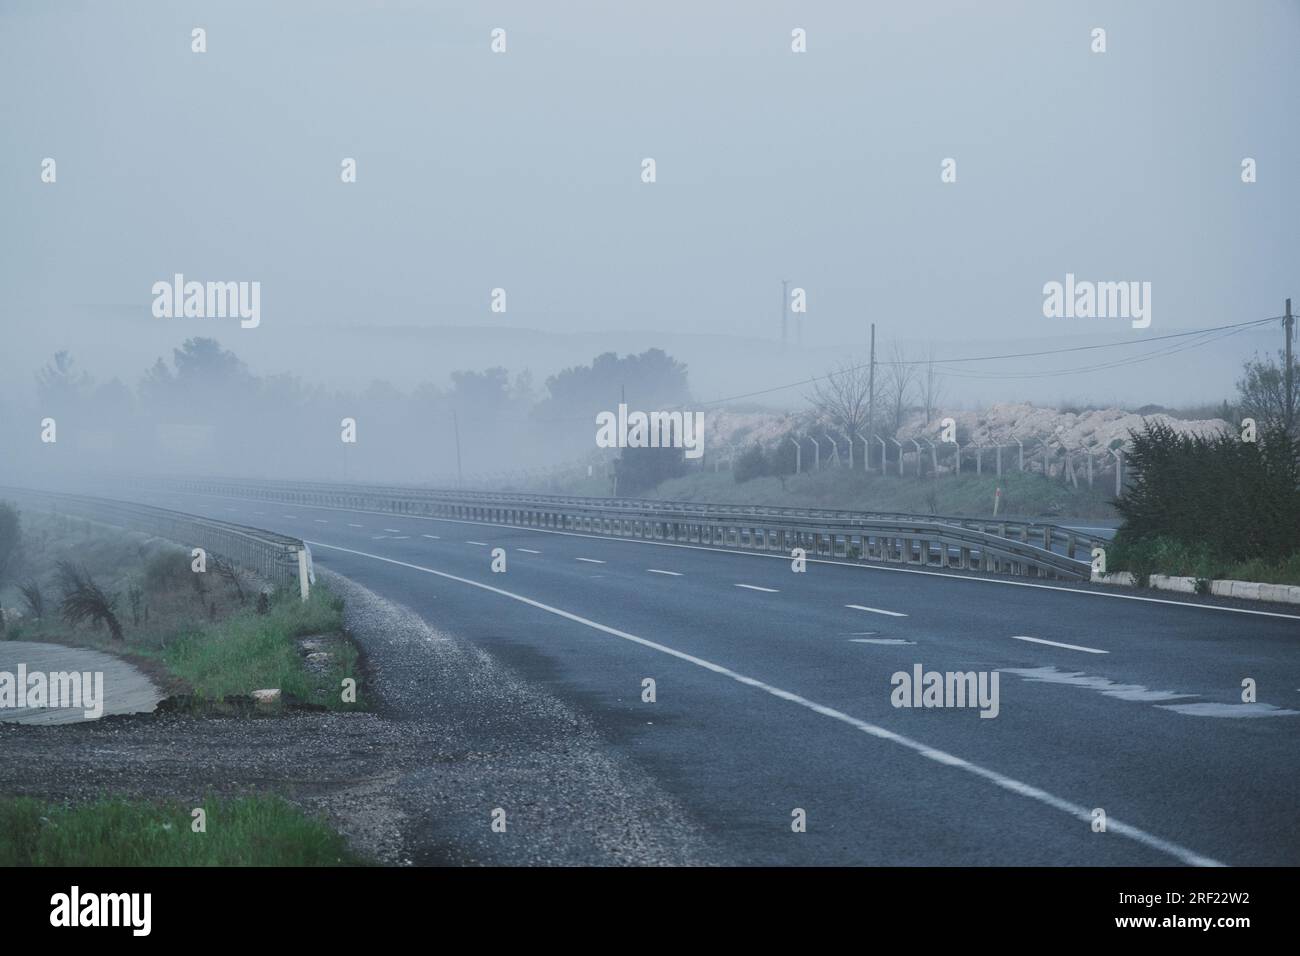 Dramatic scene resembling a movie frame, captured in the early hours of the morning. A winding road covered in thick mist, creating a low visibility a Stock Photo